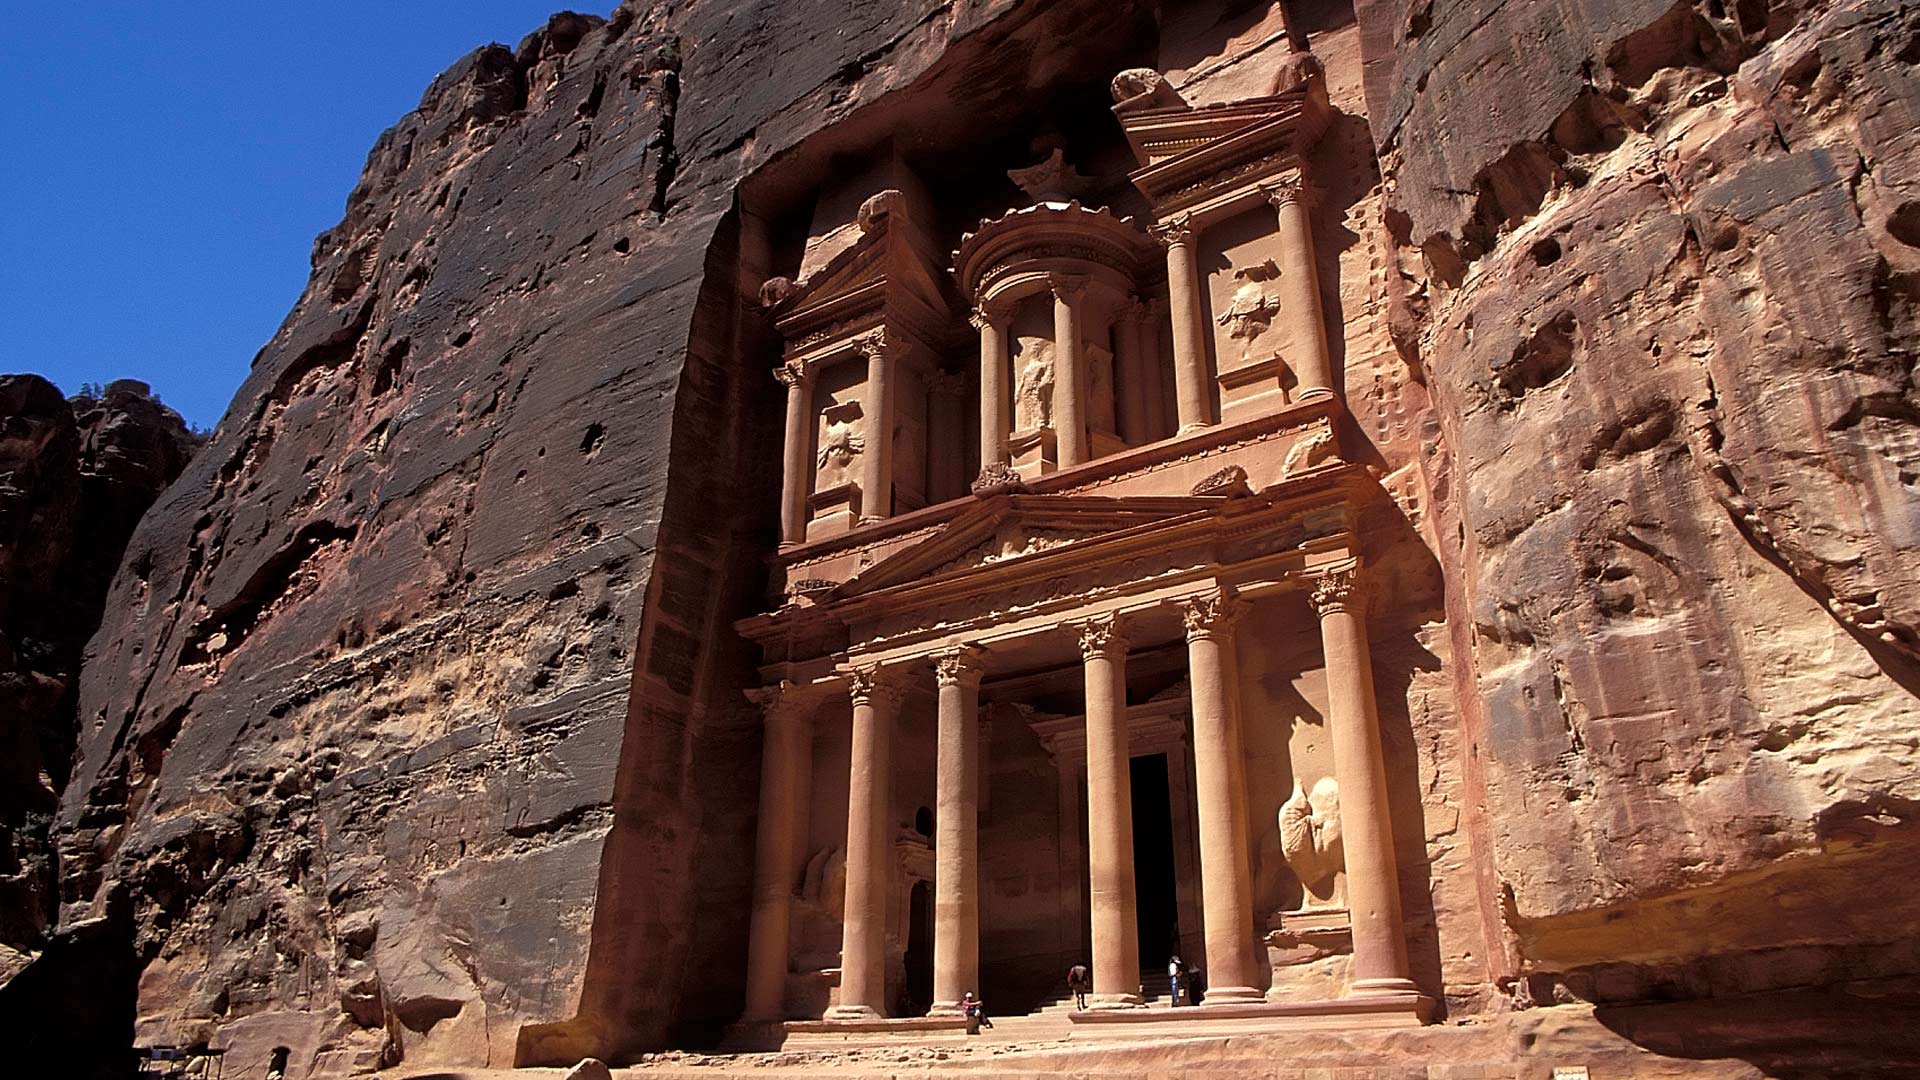 From the Pyramids & St. Catherine to Petra